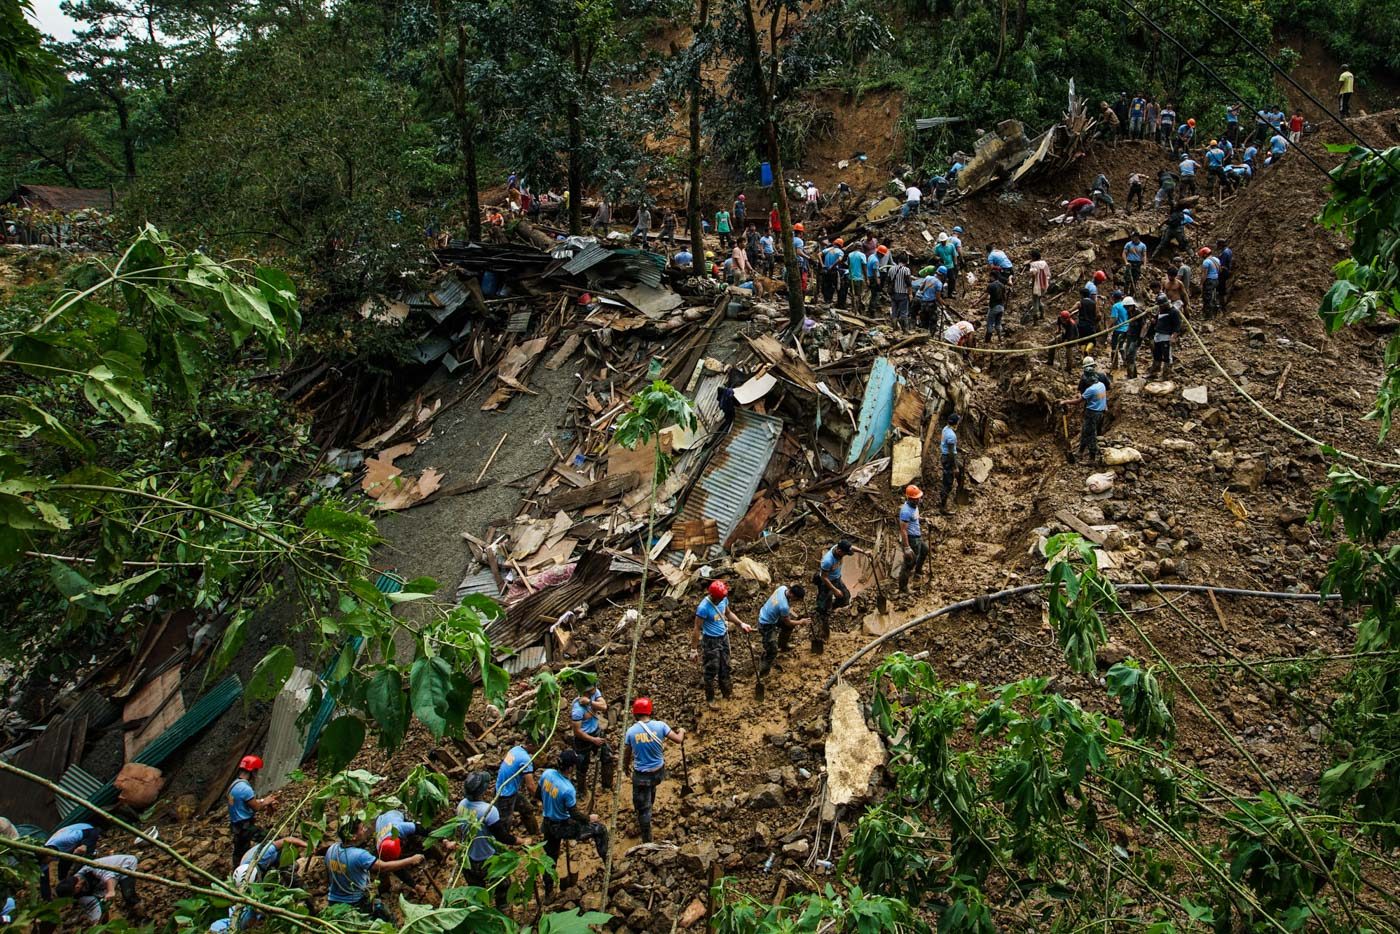 ITOGON. Police and rescue teams continue the search for bodies buried by the landslide in Ucab, Itogon in Benguet, on September 17, 2018. Photo by Jire Carreon/Rappler 